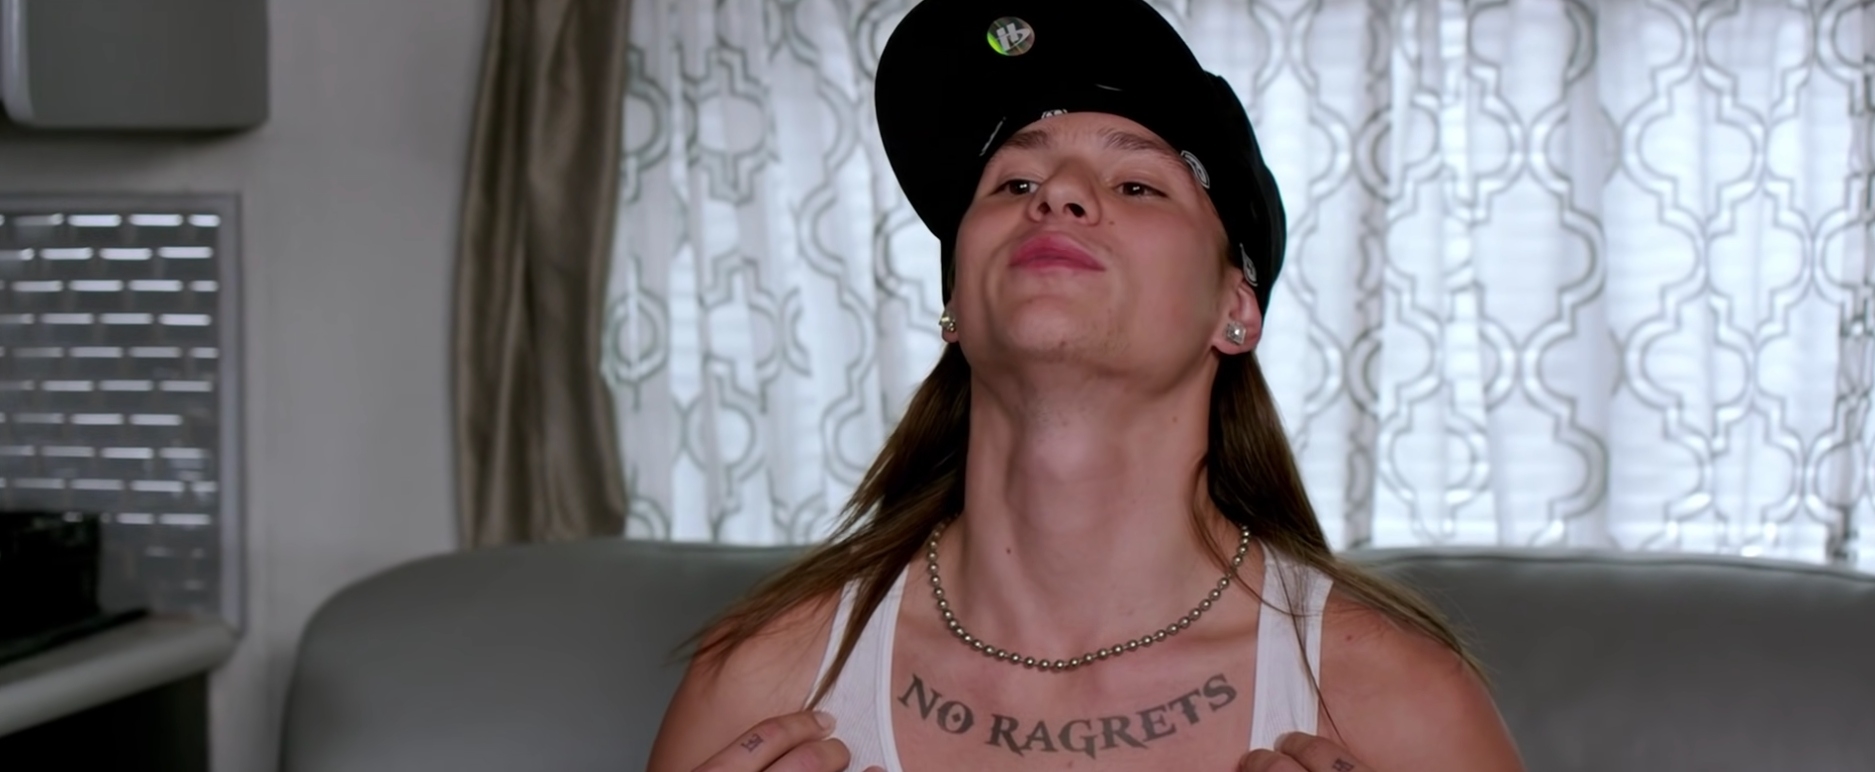 A man with a tattoo that says &quot;No ragrets&quot;